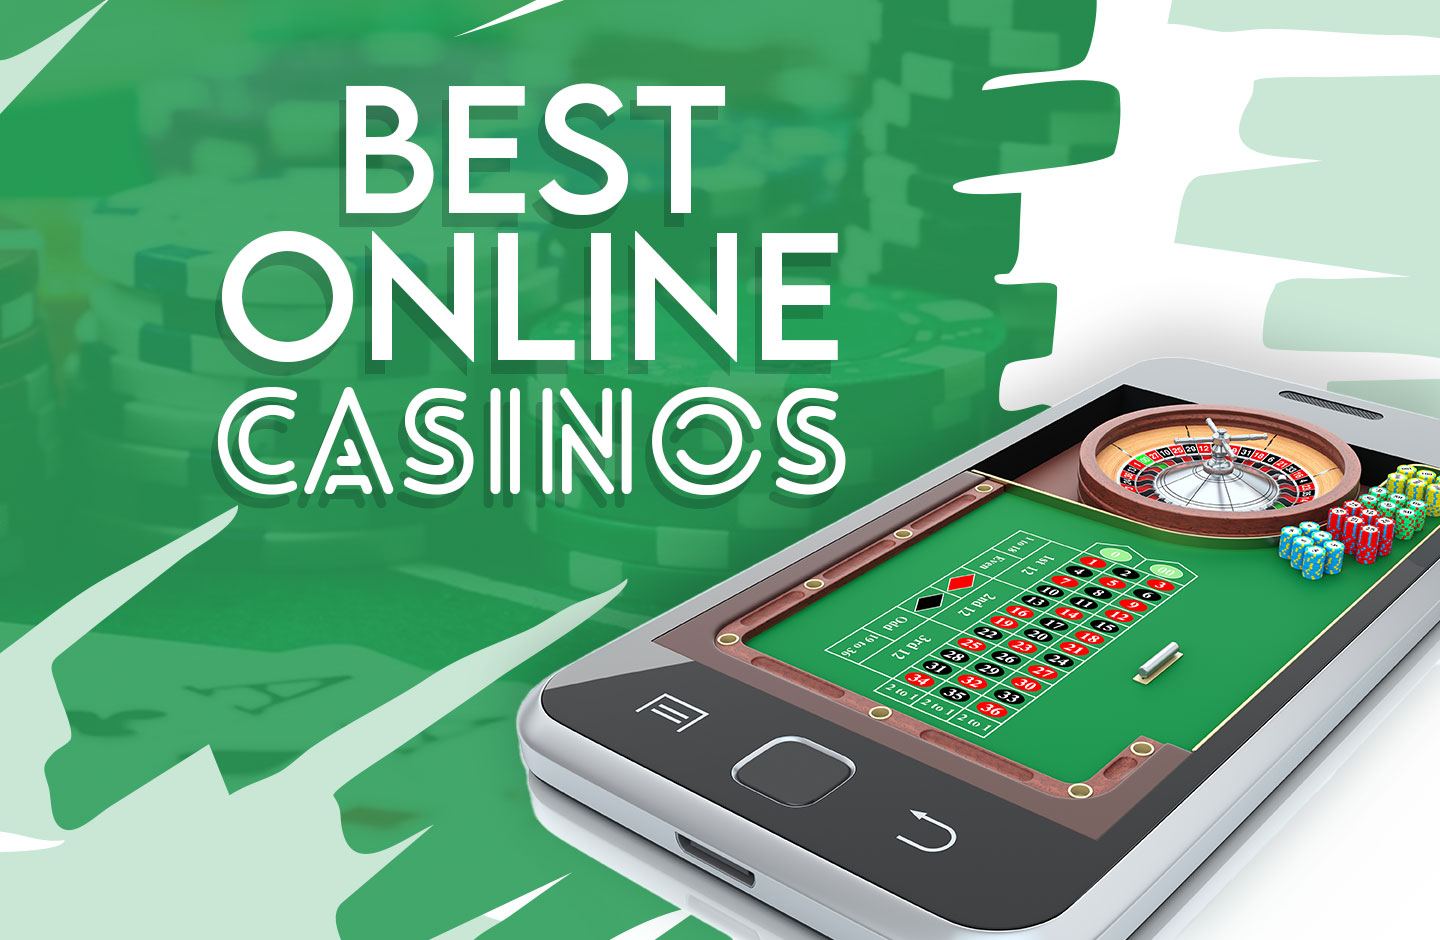 Have You Heard? deposit with payid Casino Is Your Best Bet To Grow